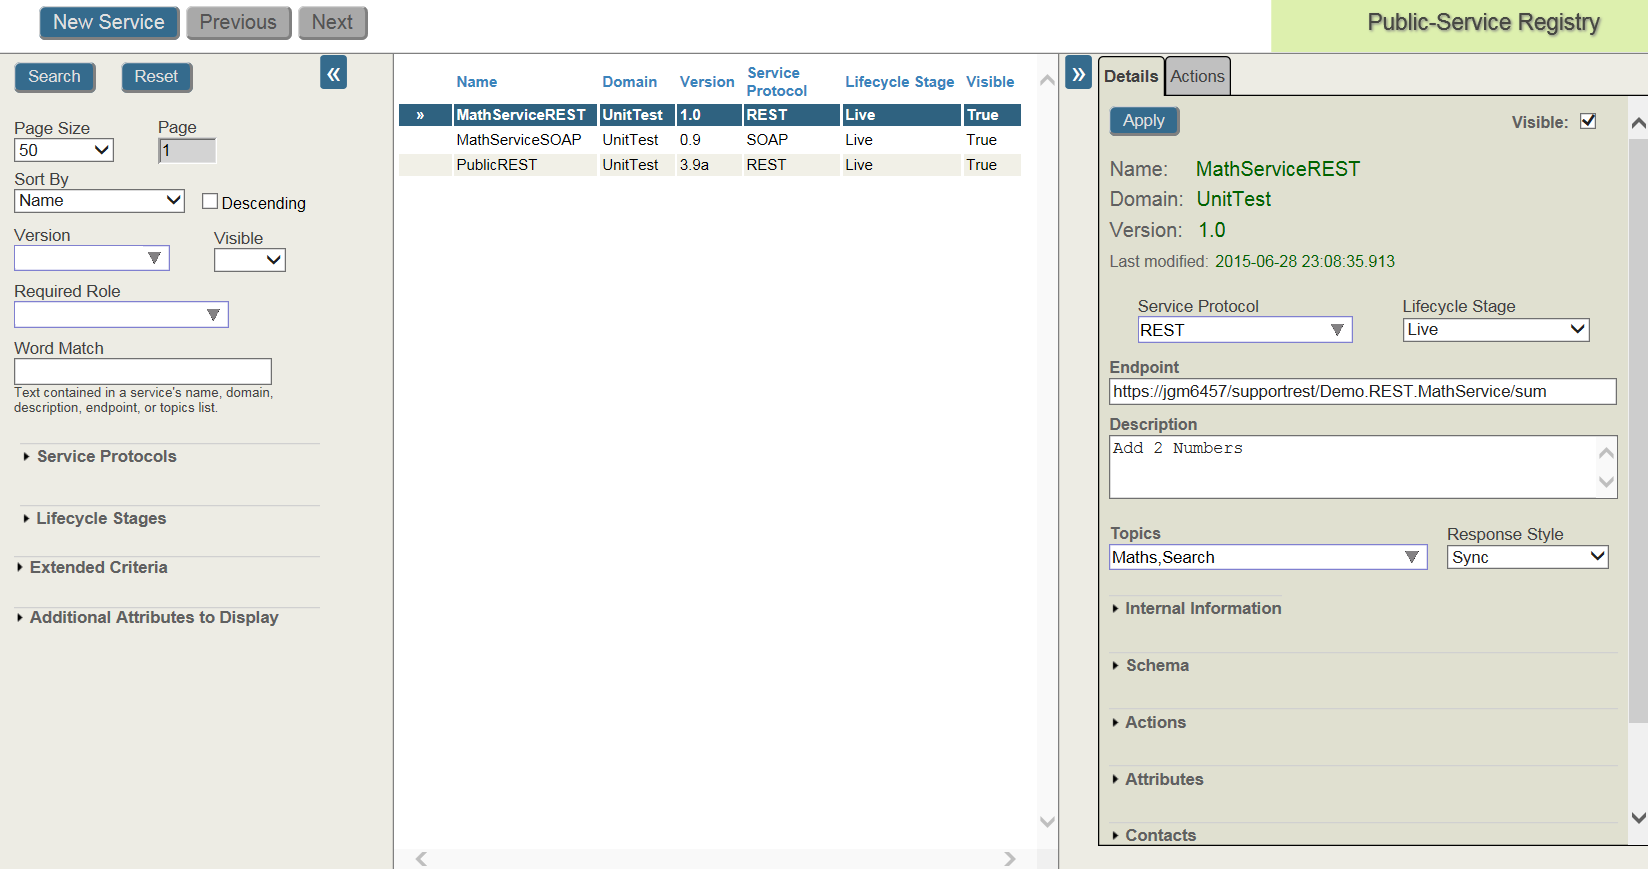 Public Service Registry page in the InterSystems IRIS Management Portal